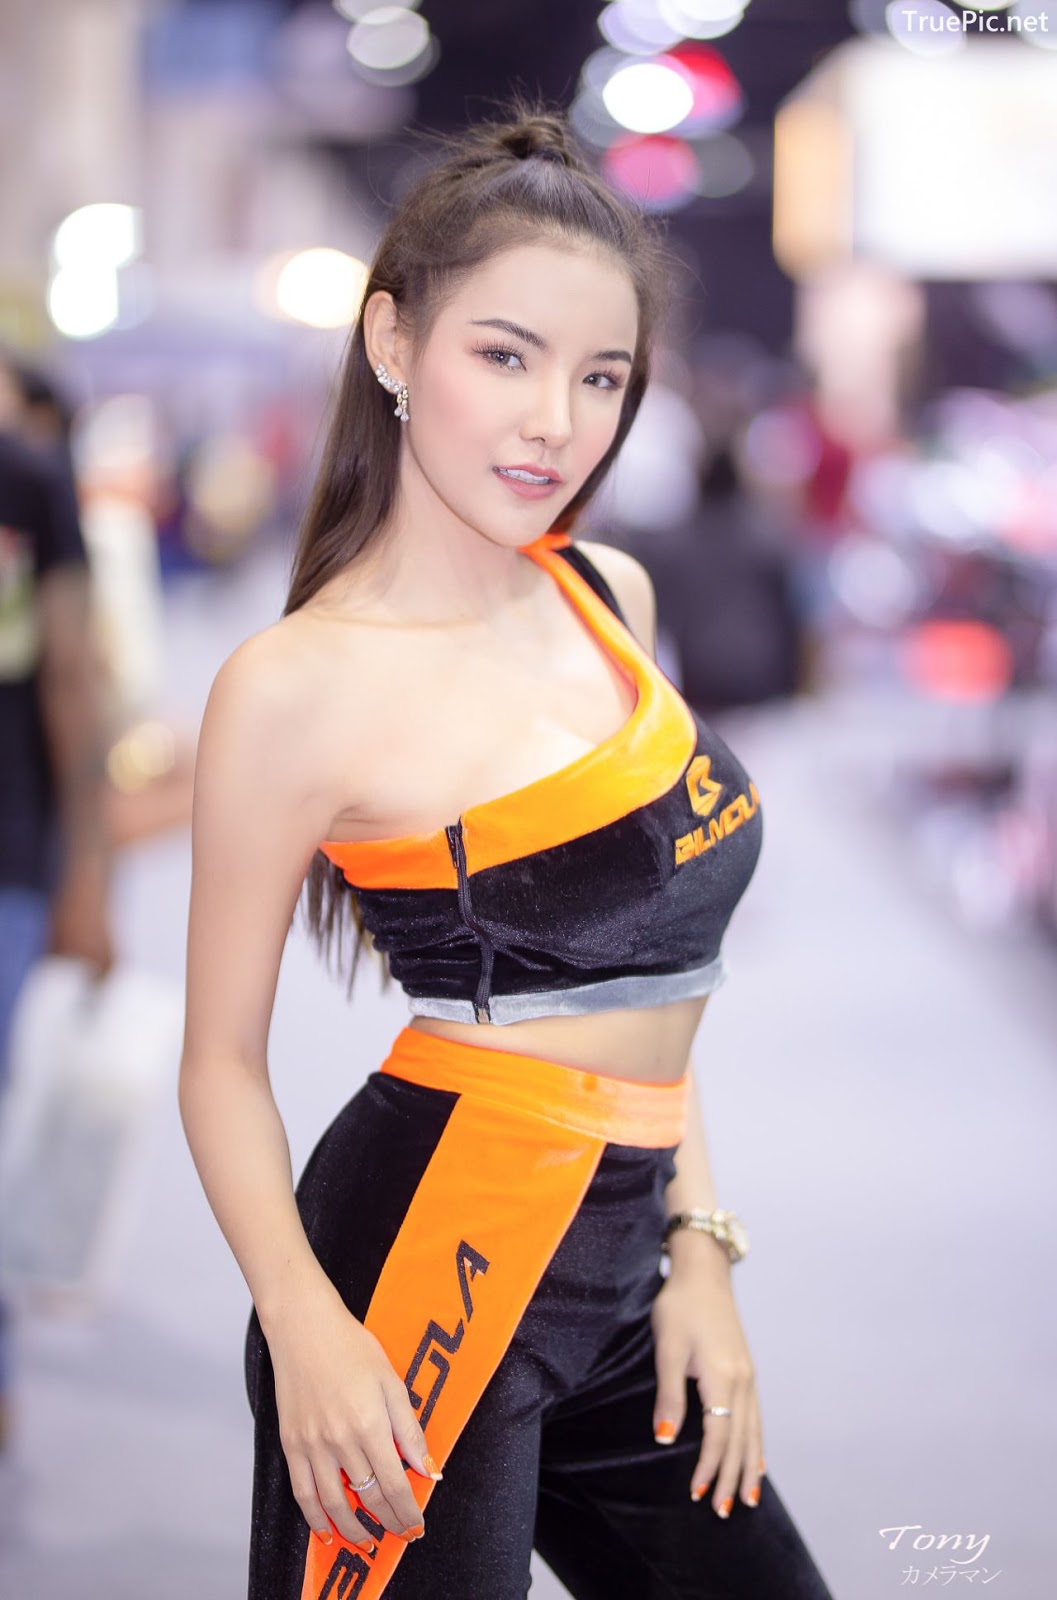 Image-Thailand-Hot-Model-Thai-Racing-Girl-At-Motor-Expo-2019-TruePic.net- Picture-112